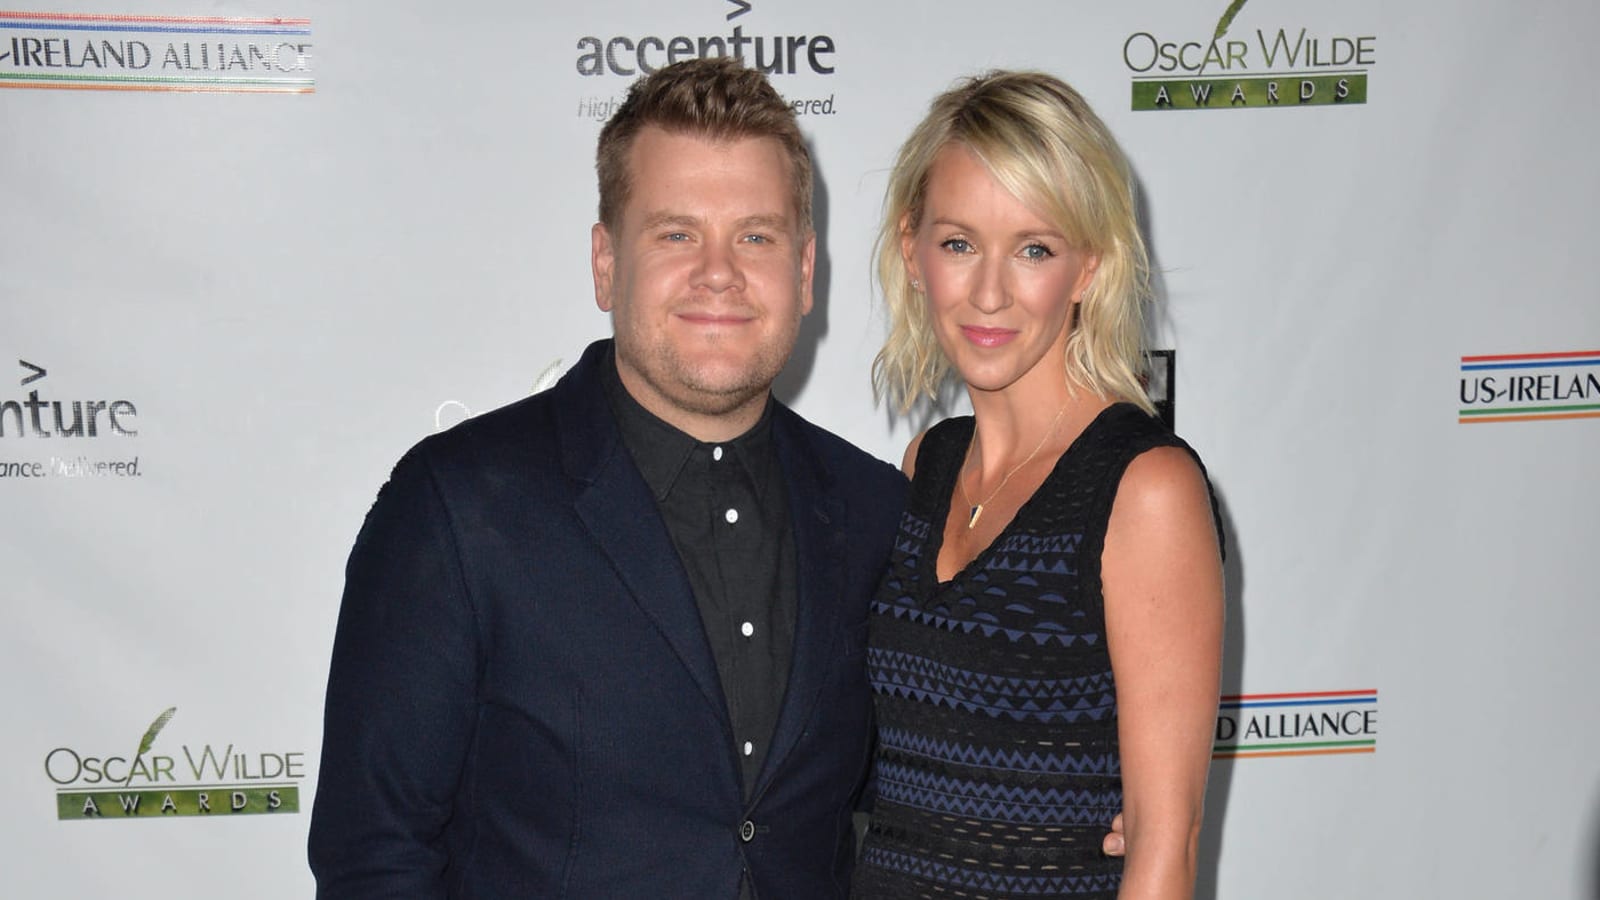 James Corden's wife got a call from this A-lister while in the bathroom